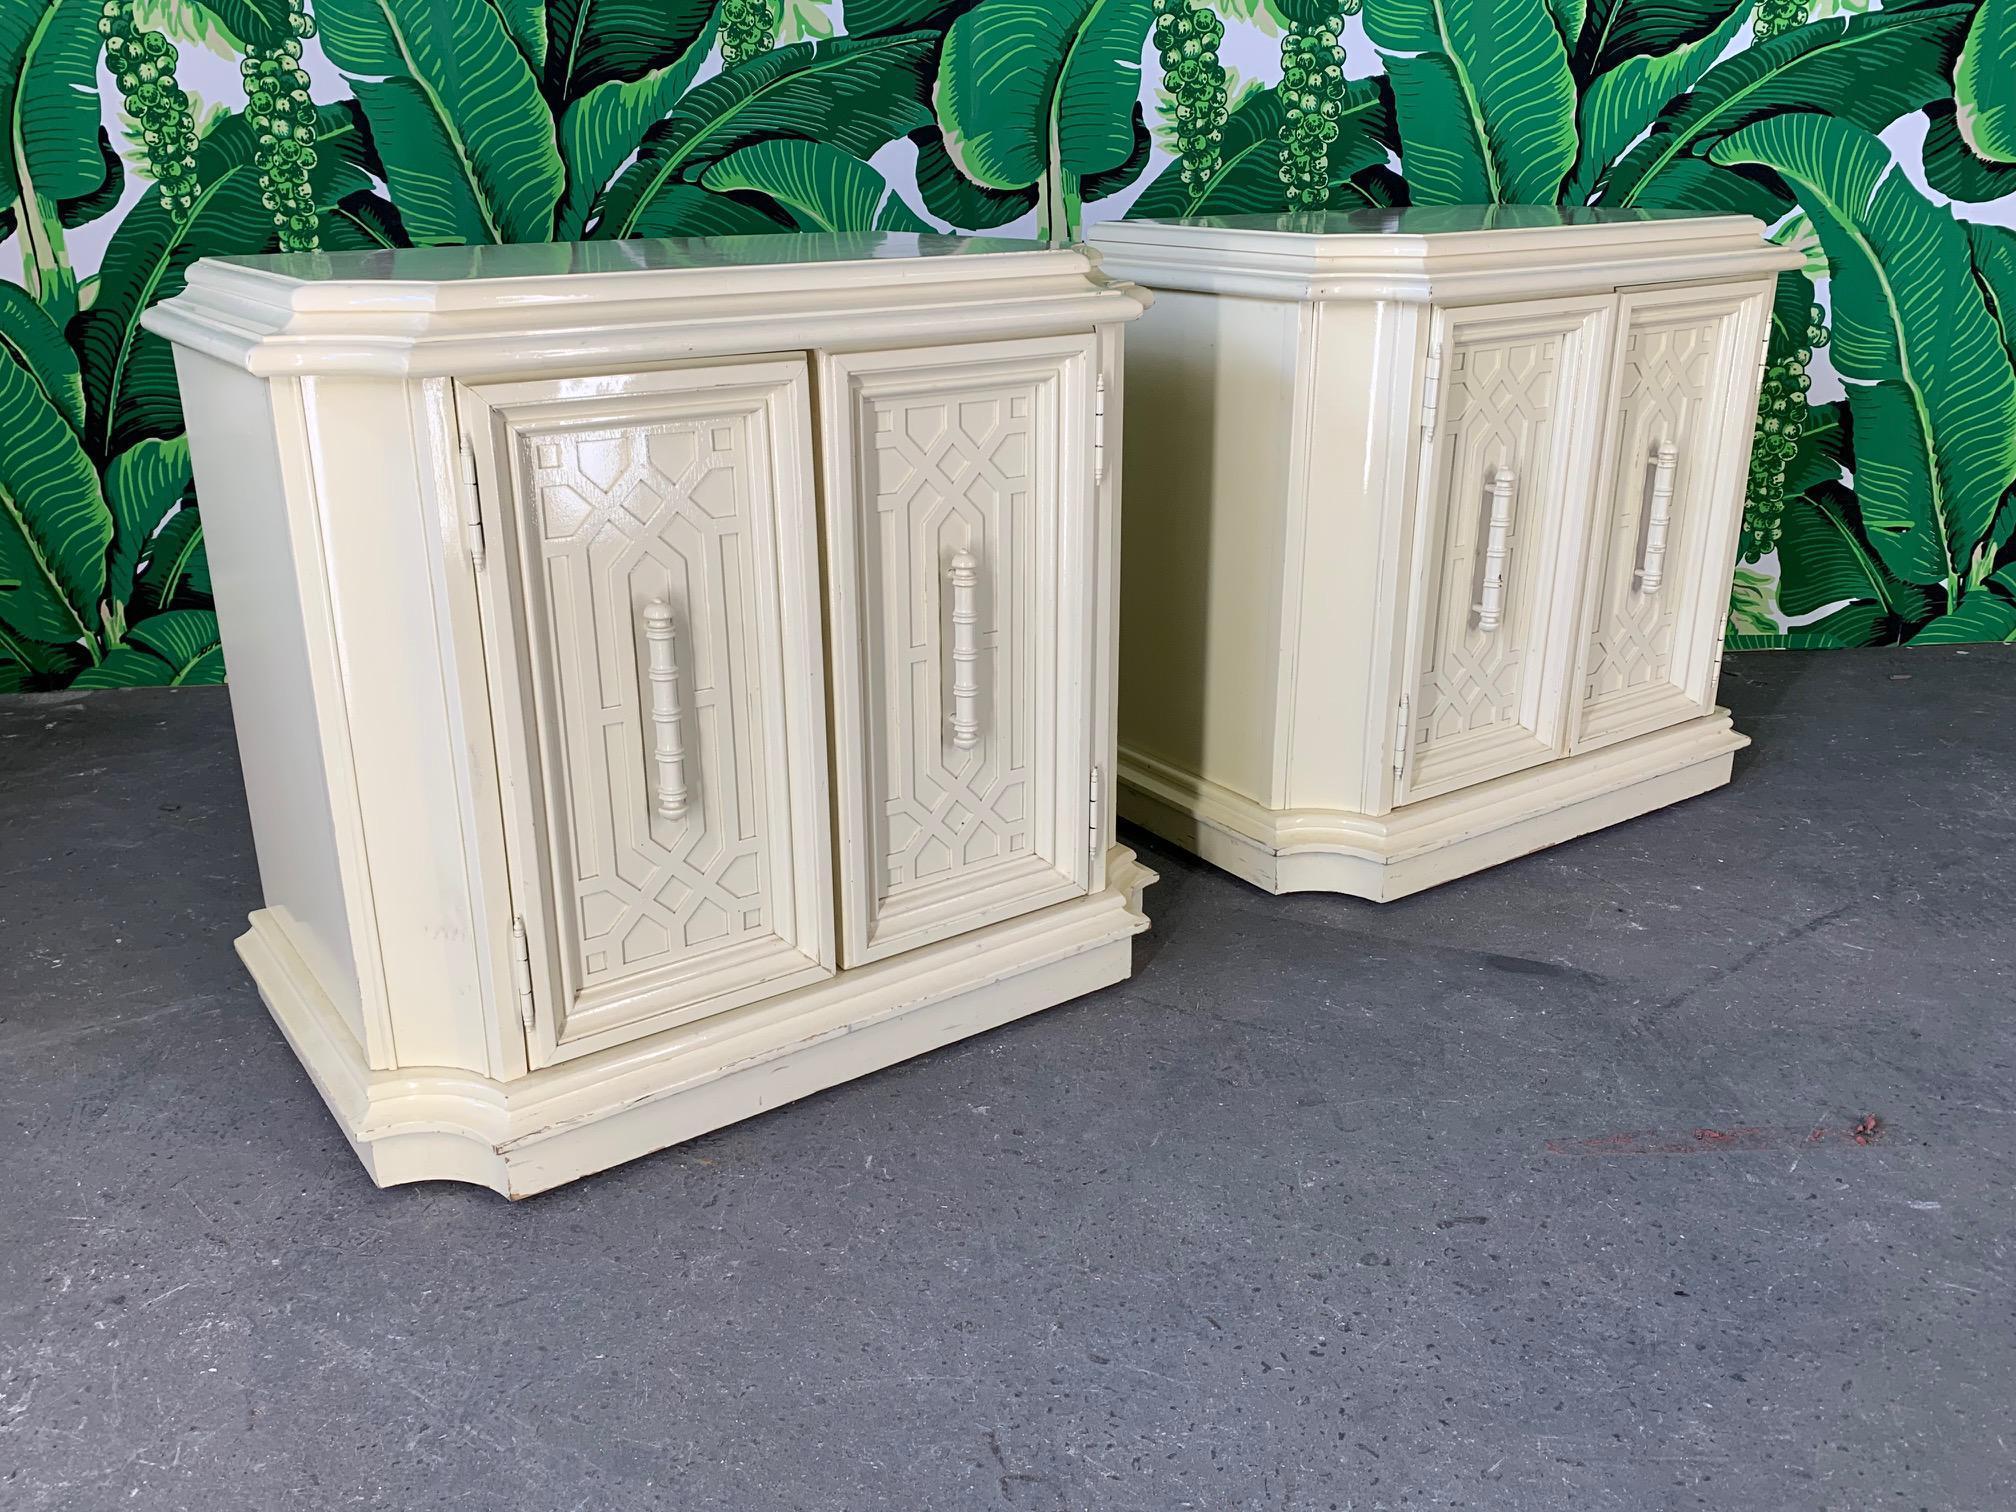 Pair of nightstands featuring chinoiserie style detailing. Double doors open to reveal ample storage. High gloss lacquer finish in ecru. Made by National Mt. Airy but unmarked. Good condition, with scuffs and abrasions to finish, see photos for